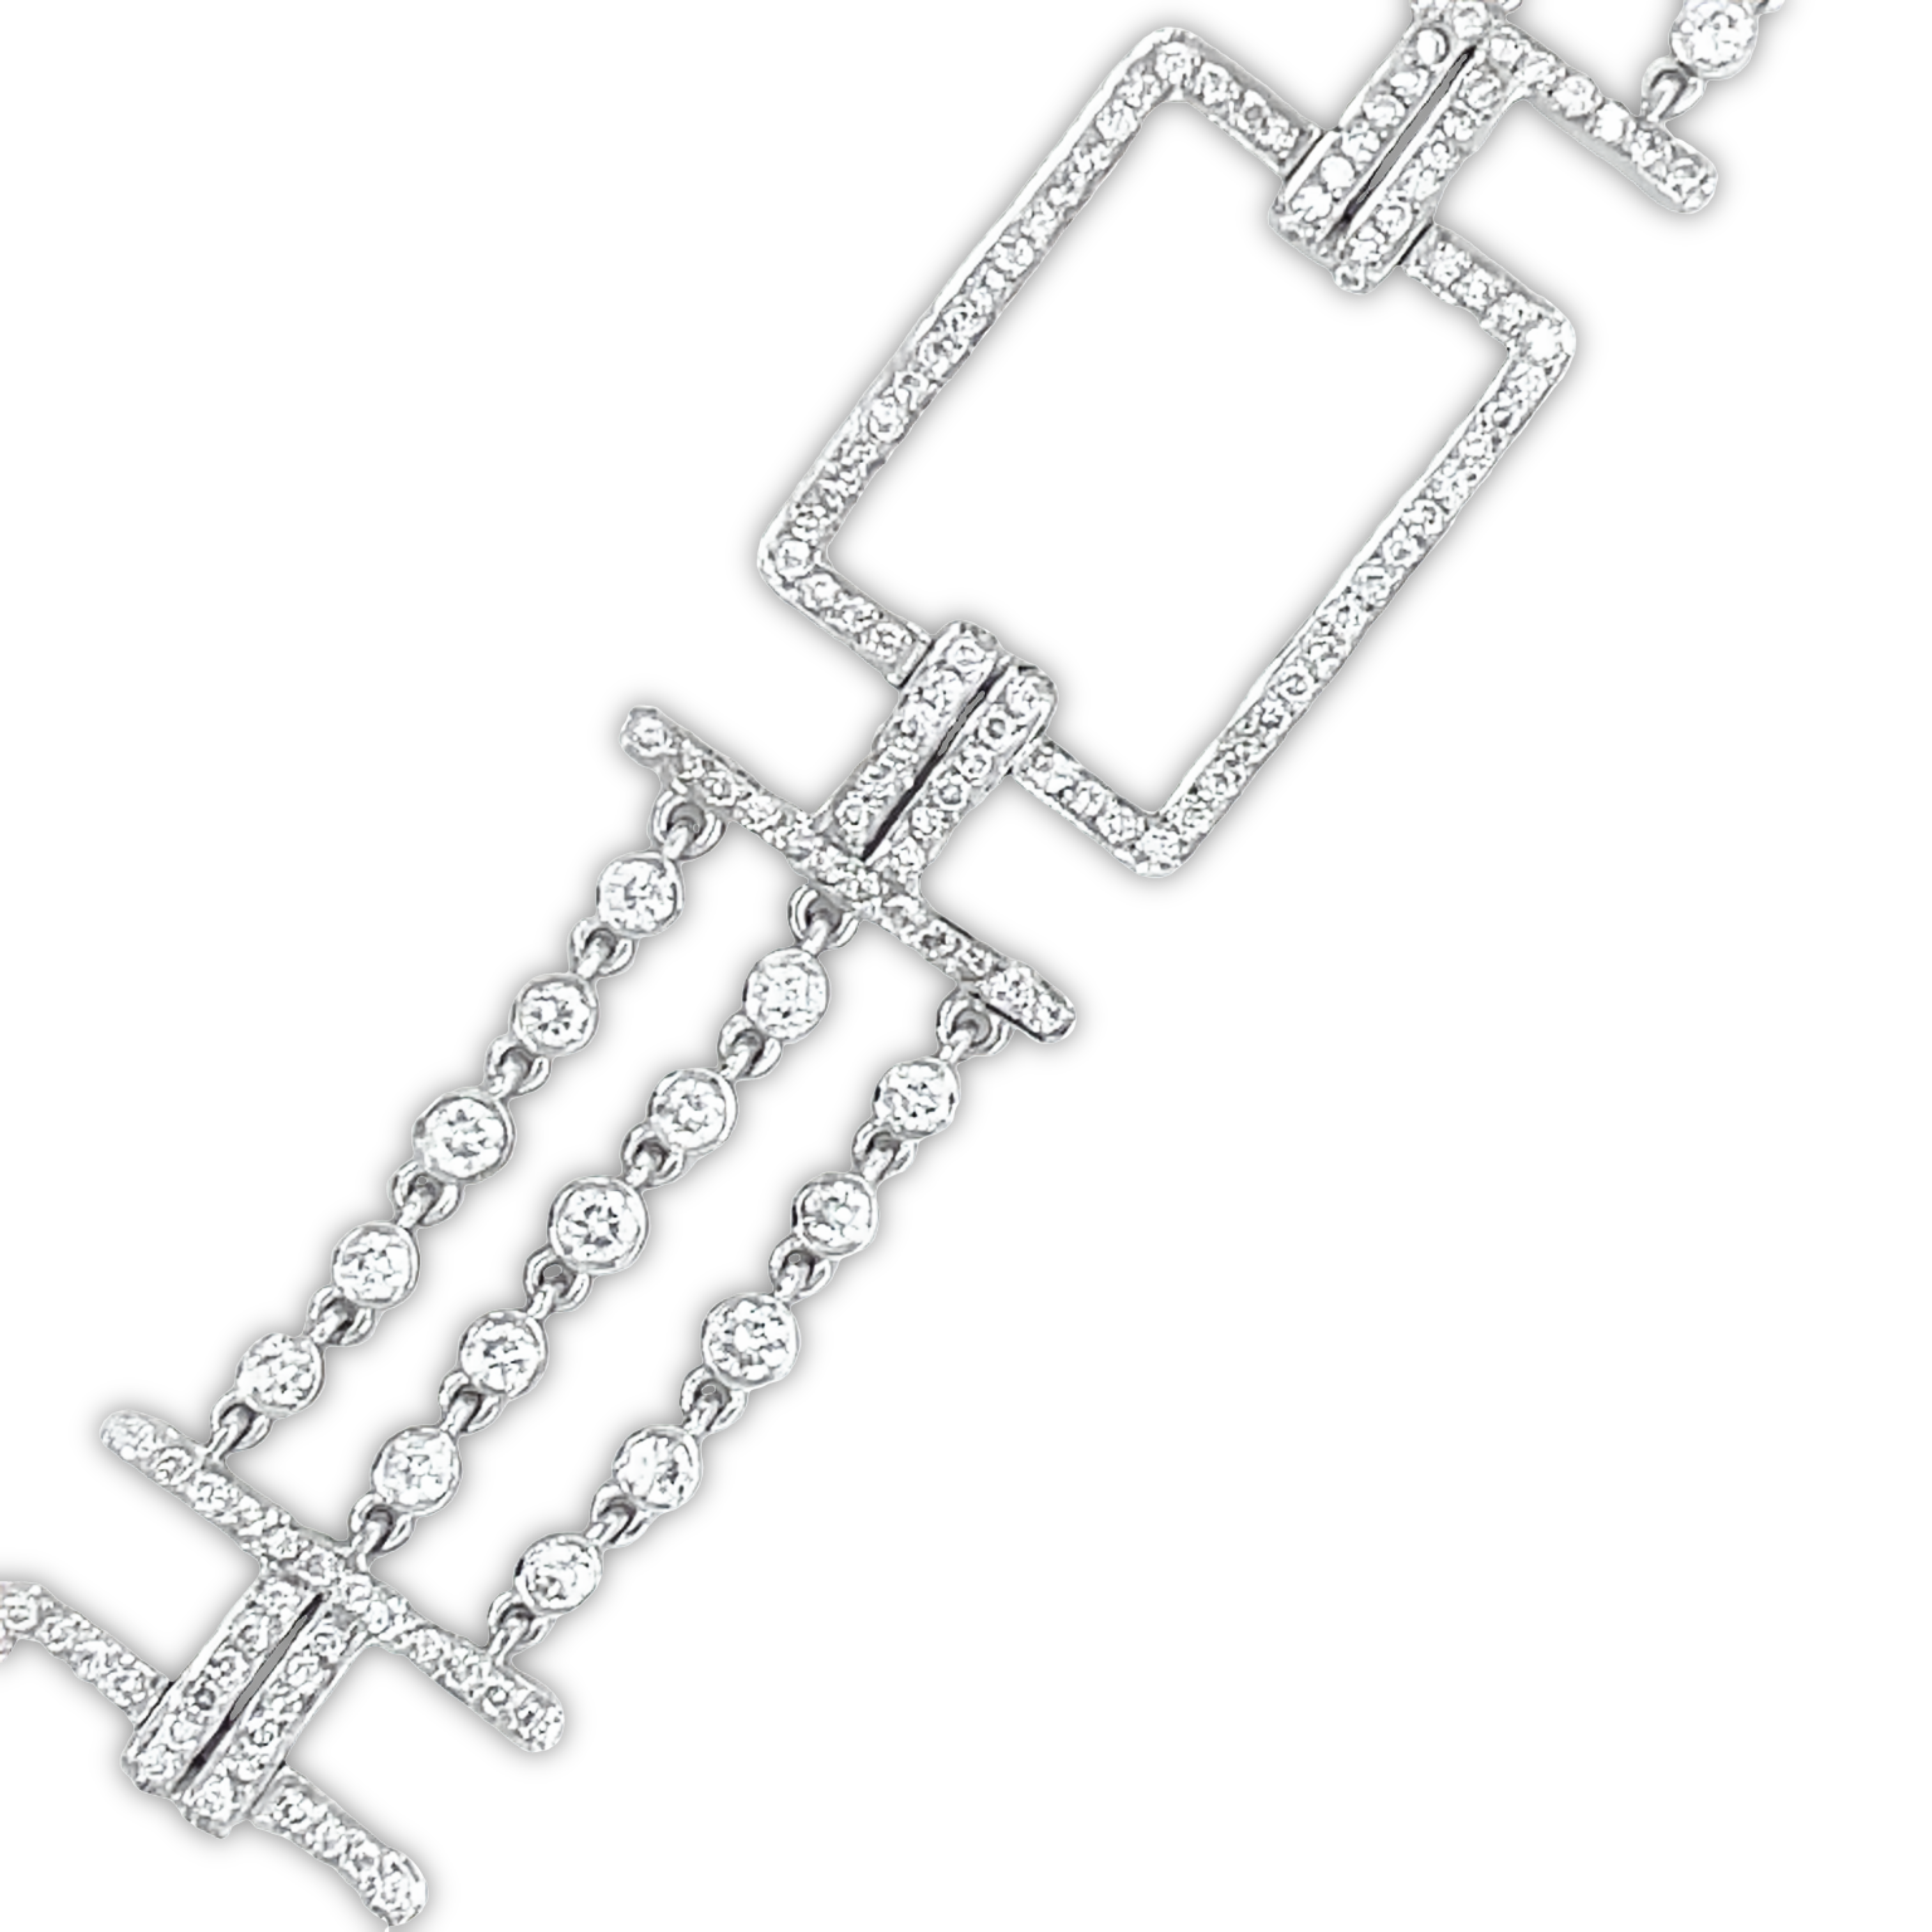 This 18K white gold bracelet features premium diamonds 2.32 cts in E/F quality, with a 0.5" width. It is 8" in length and includes a 1.5" sizing loop, secured with a lobster catch. An exquisite piece worthy of admiration.